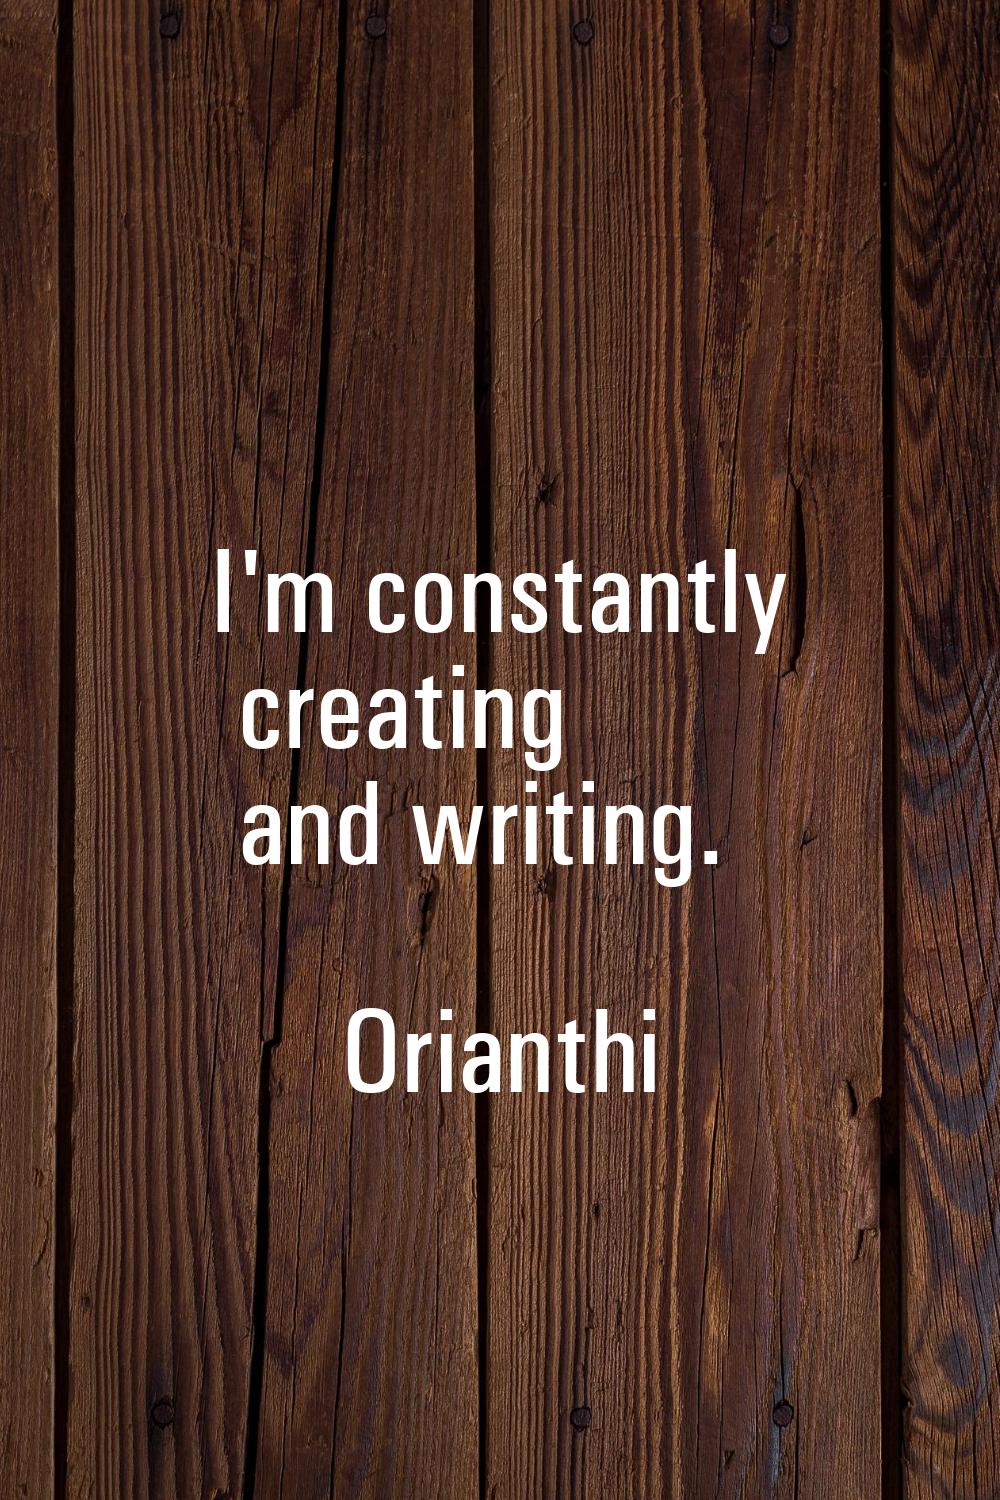 I'm constantly creating and writing.